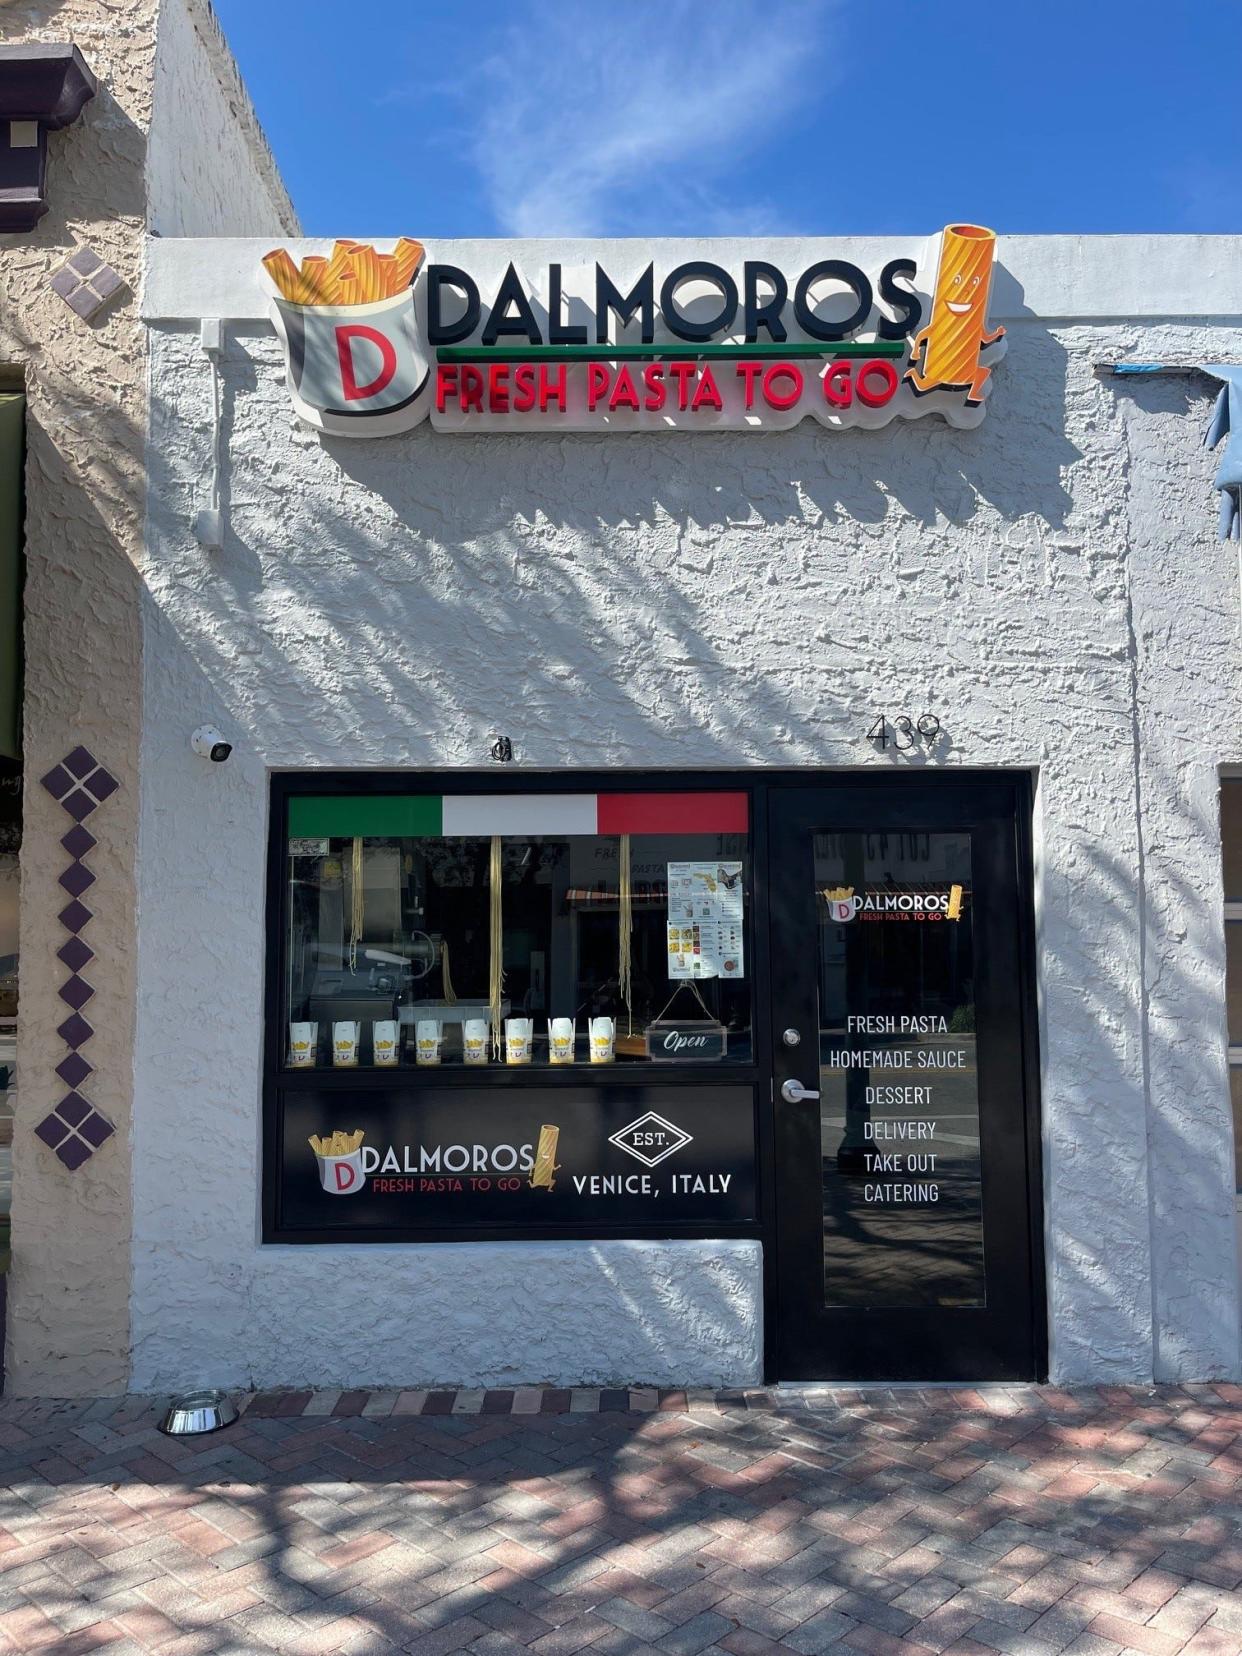 The newest DalMoros Fresh Pasta To Go opened March 5 on Clematis Street in West Palm Beach. Their location on Atlantic Avenue in Delray Beach opened last September.